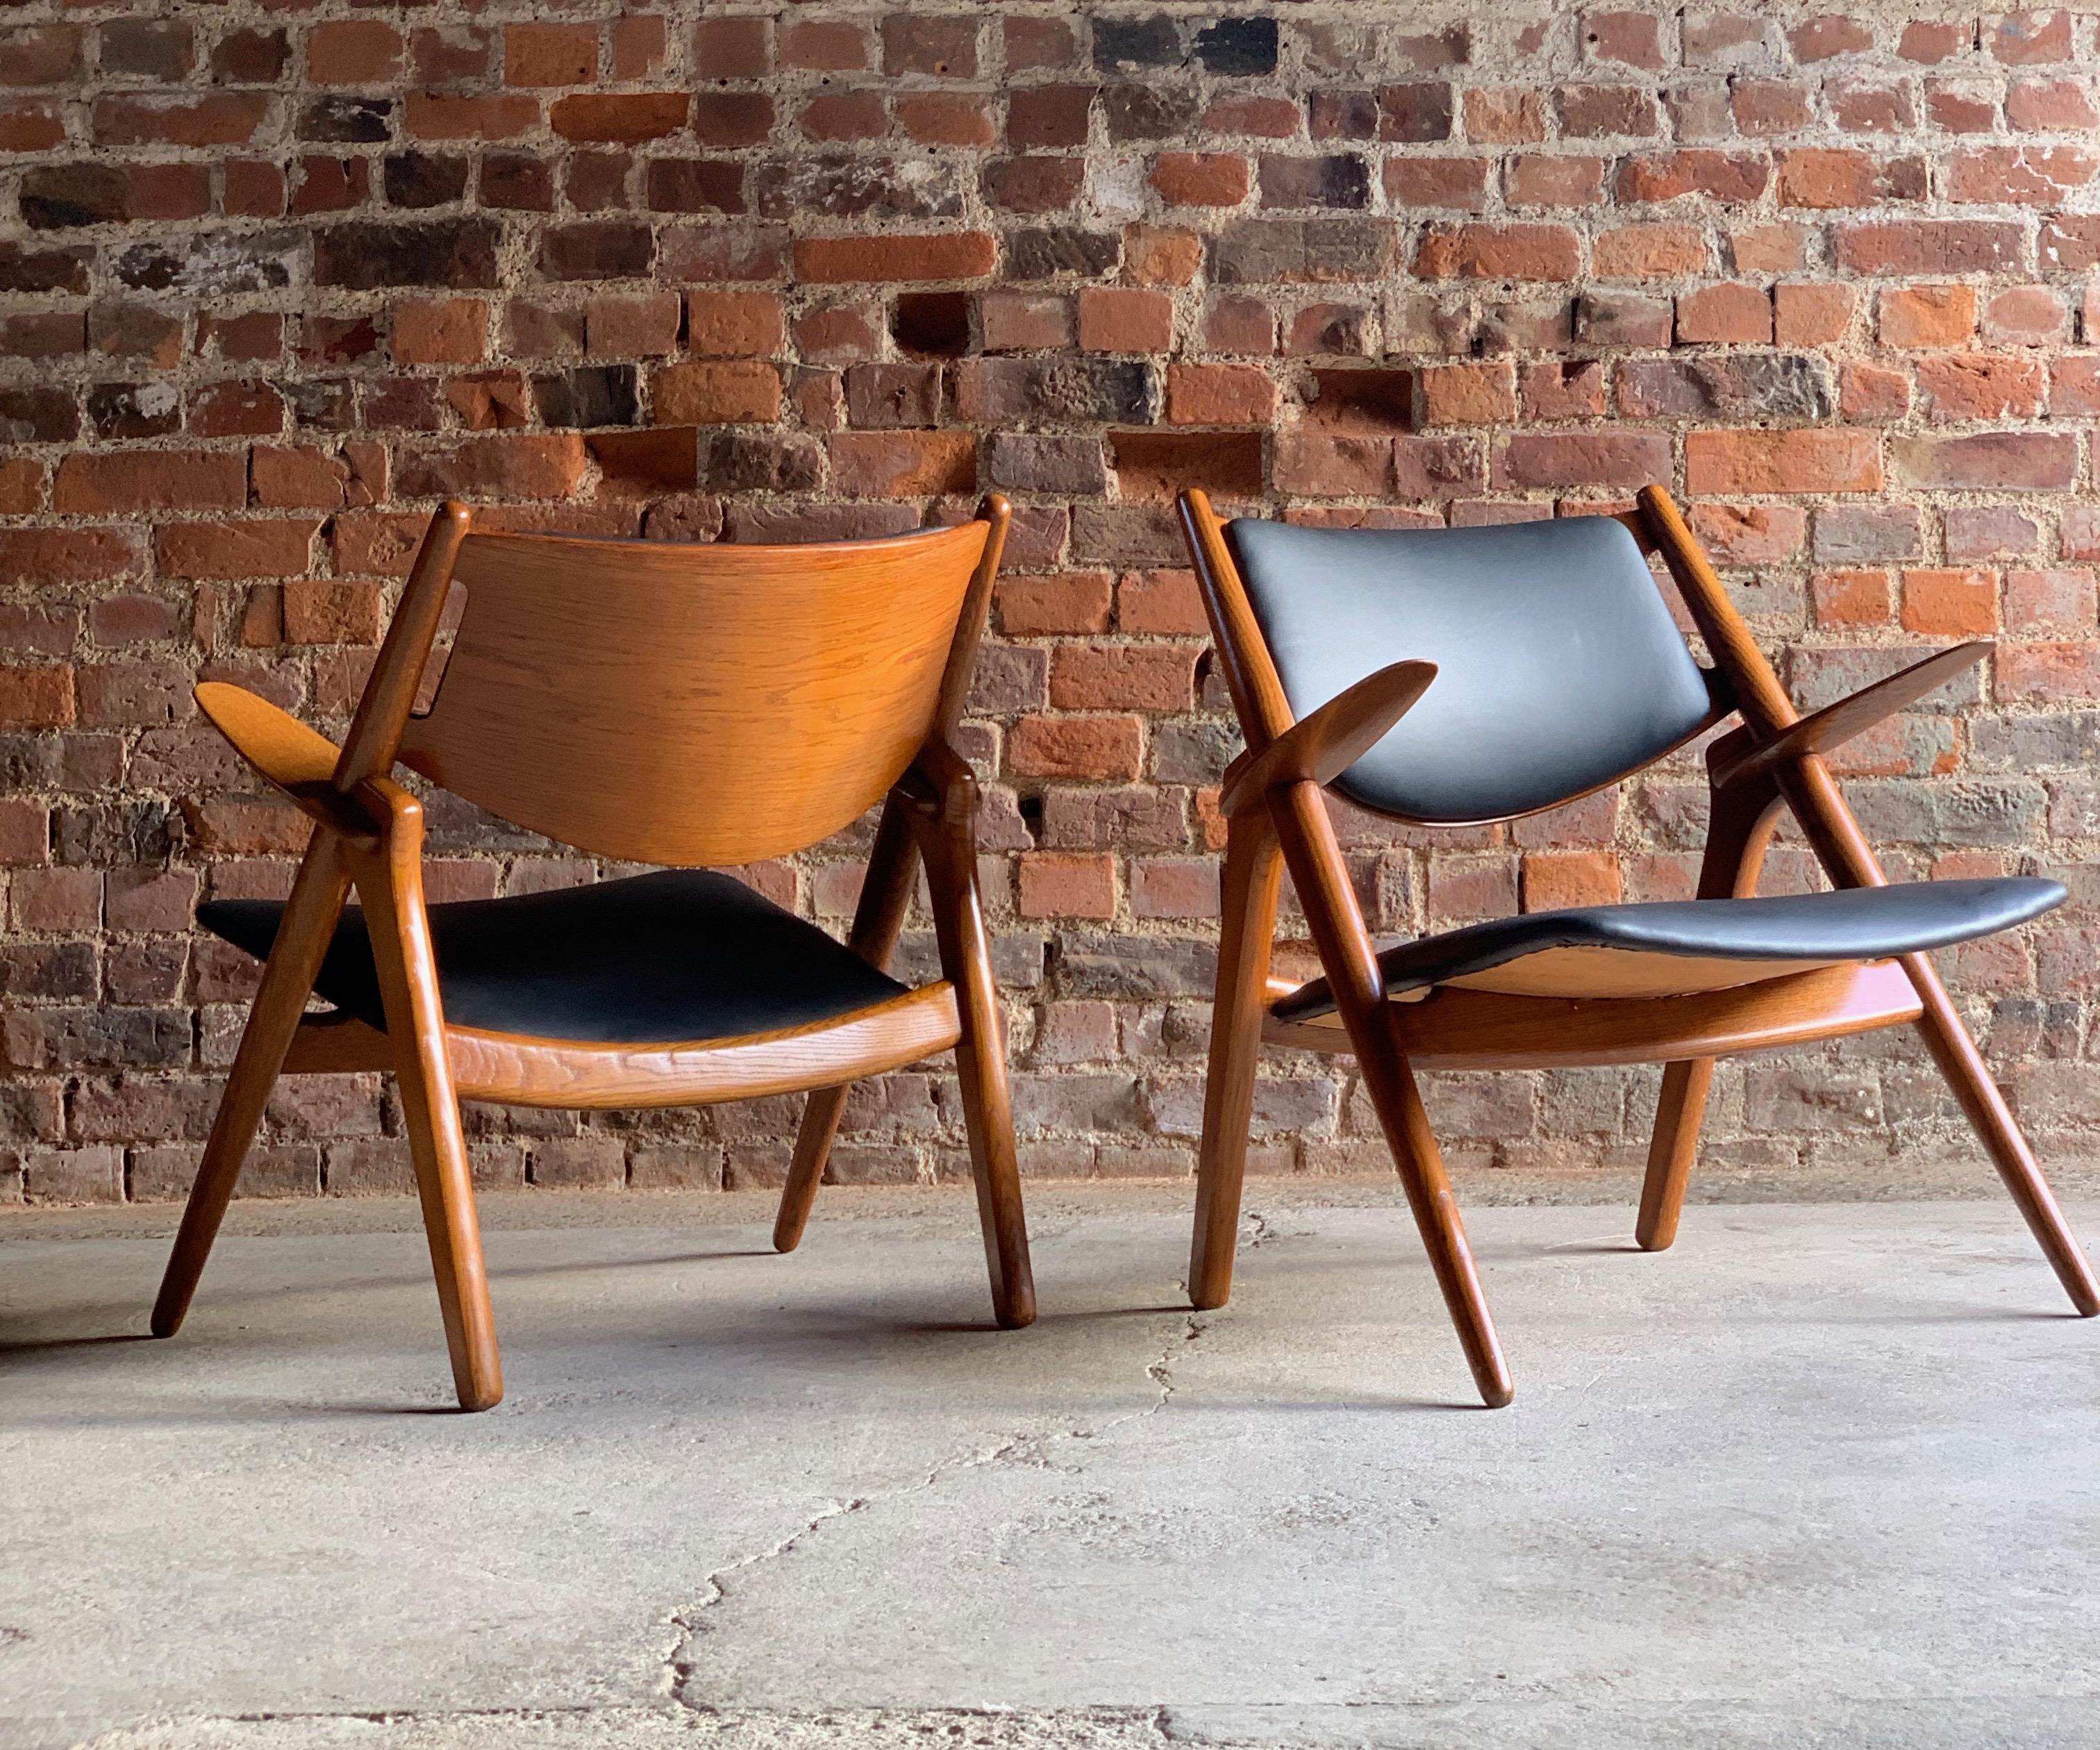 Magnificent pair of original CH28 oak Sawbuck lounge chairs by Hans J. Wegner for Carl Hansen and Son, Denmark, circa 1950s, both chairs are offered in superb condition.



Manufacturer: Carl Hansen & Søn
Designer: Hans J. Wegner
Country: